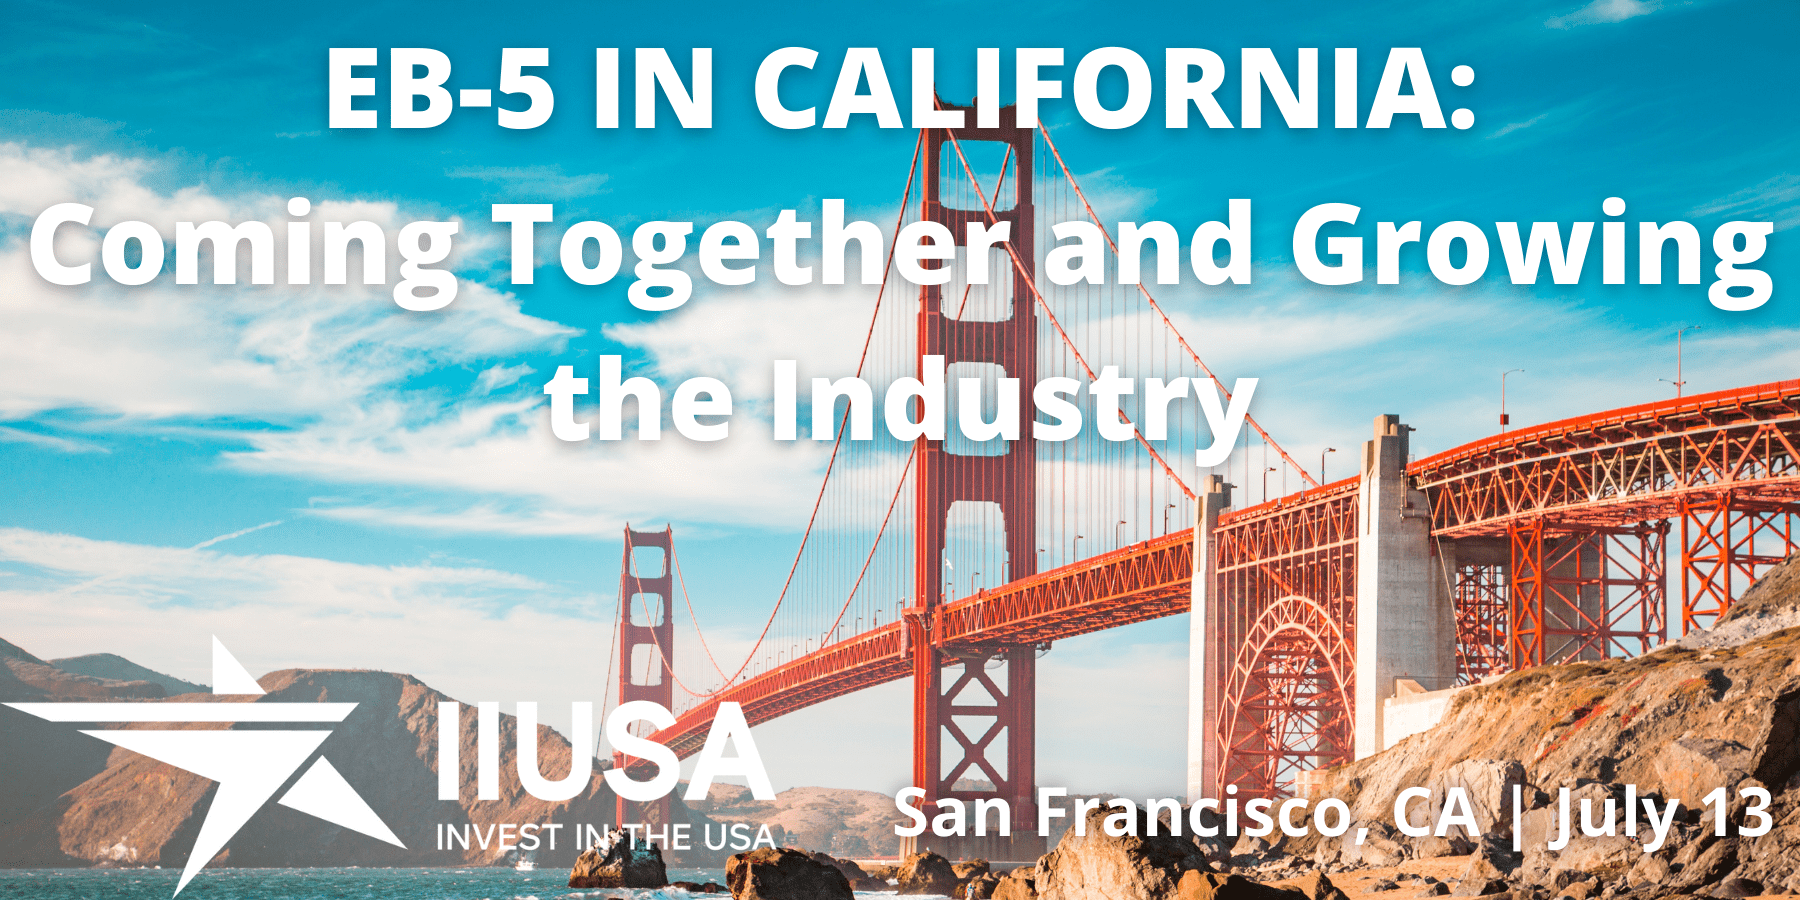 EB-5 in California: Coming Together and Growing the Industry